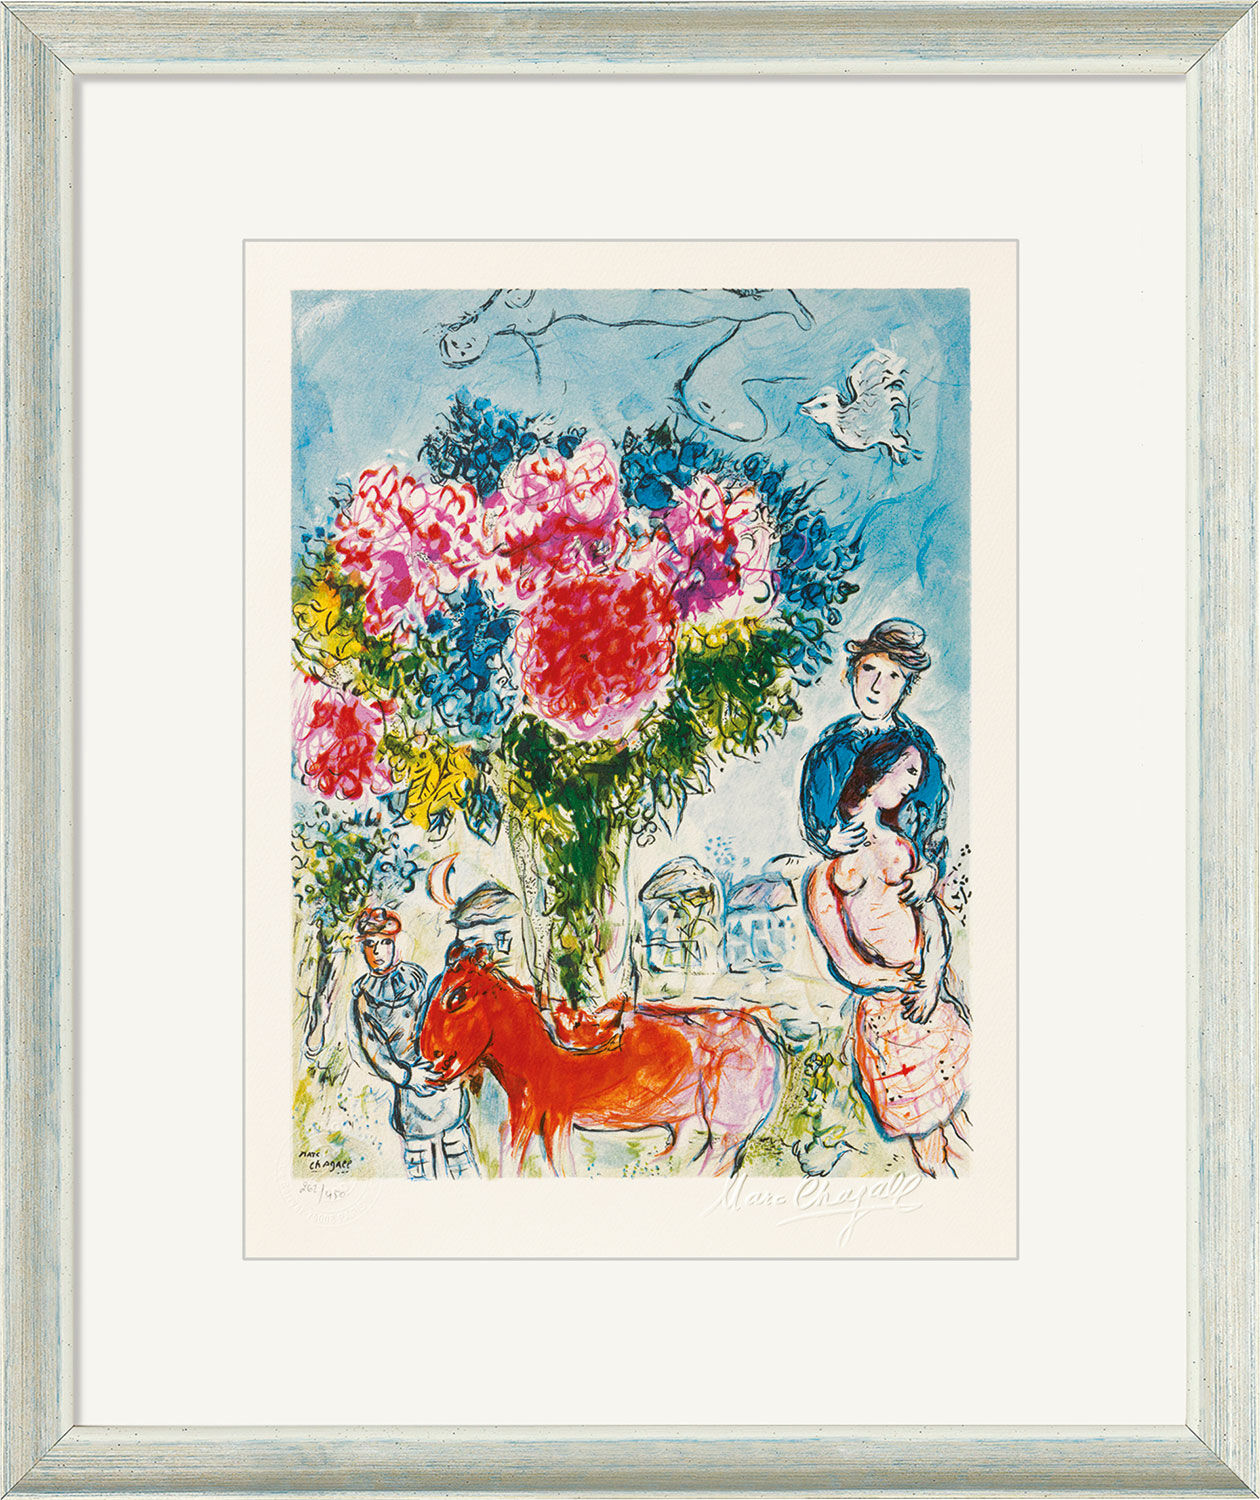 Picture "Personnages fantastiques" (1974), framed by Marc Chagall